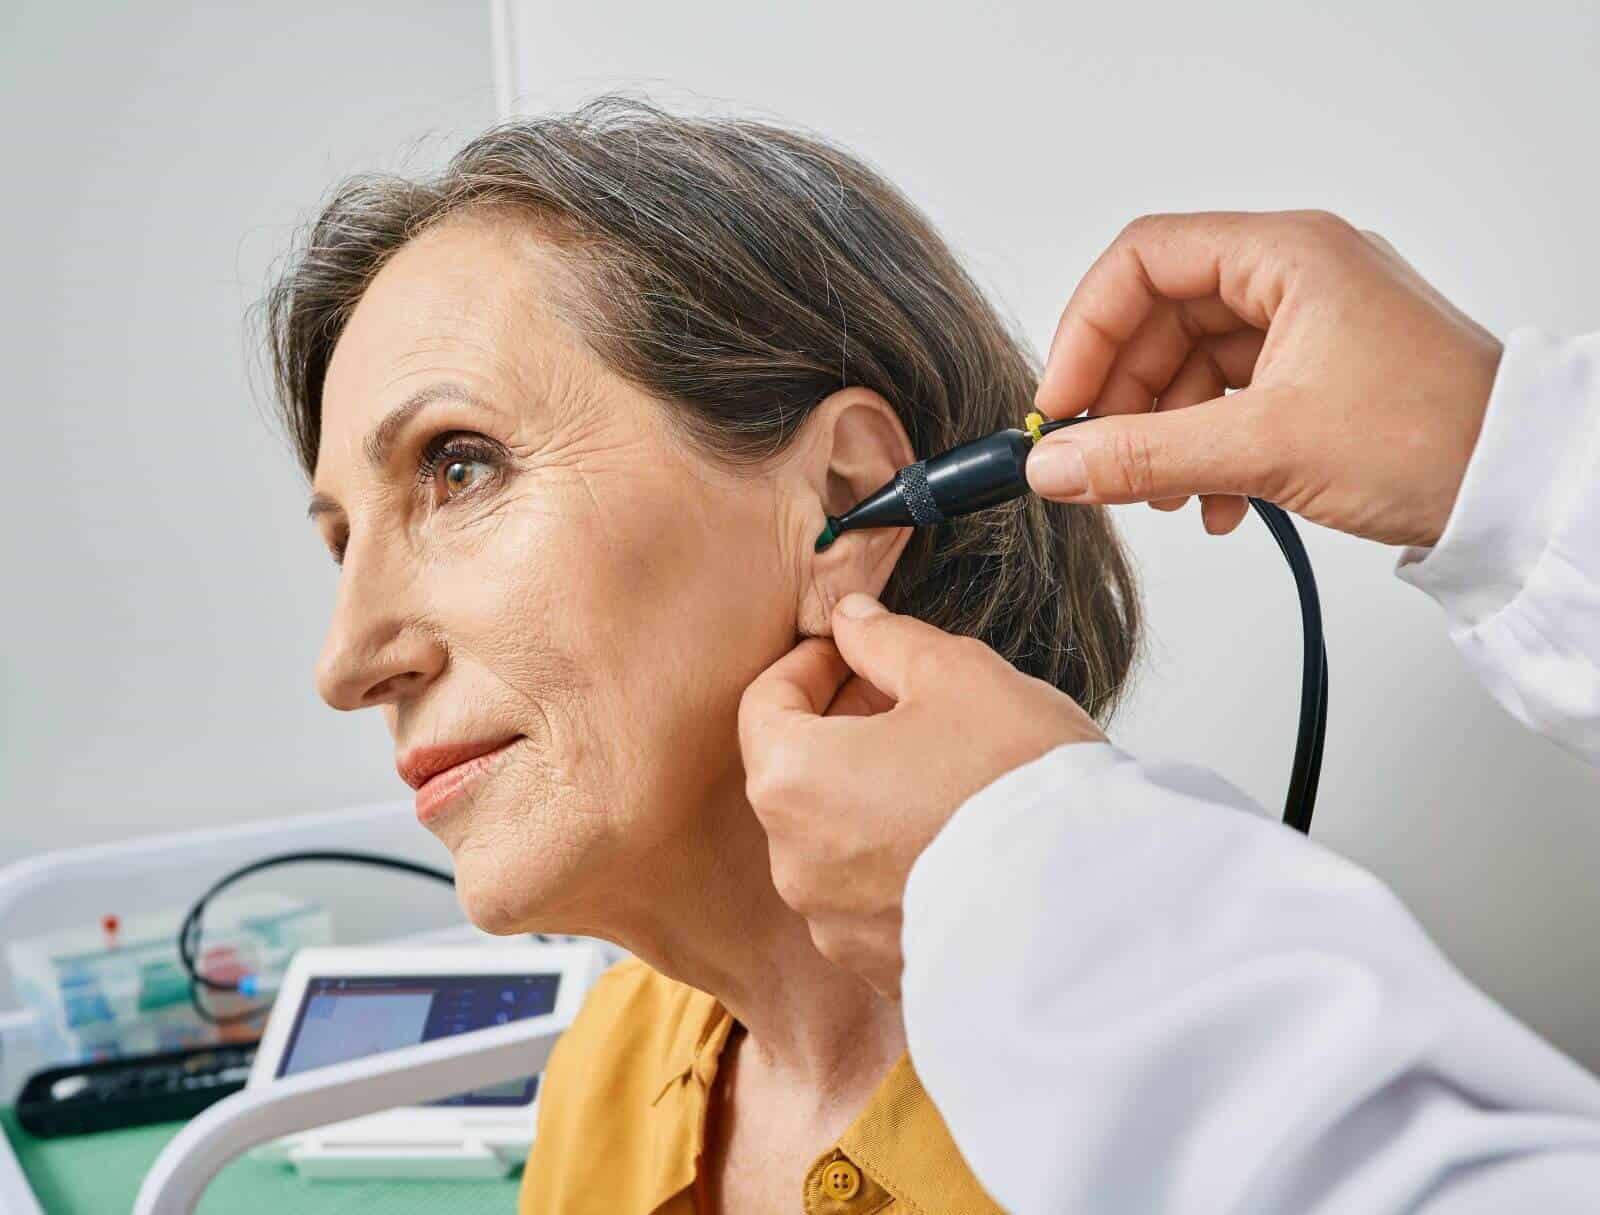 audiologist conducting ear exam of woman as she looks onward